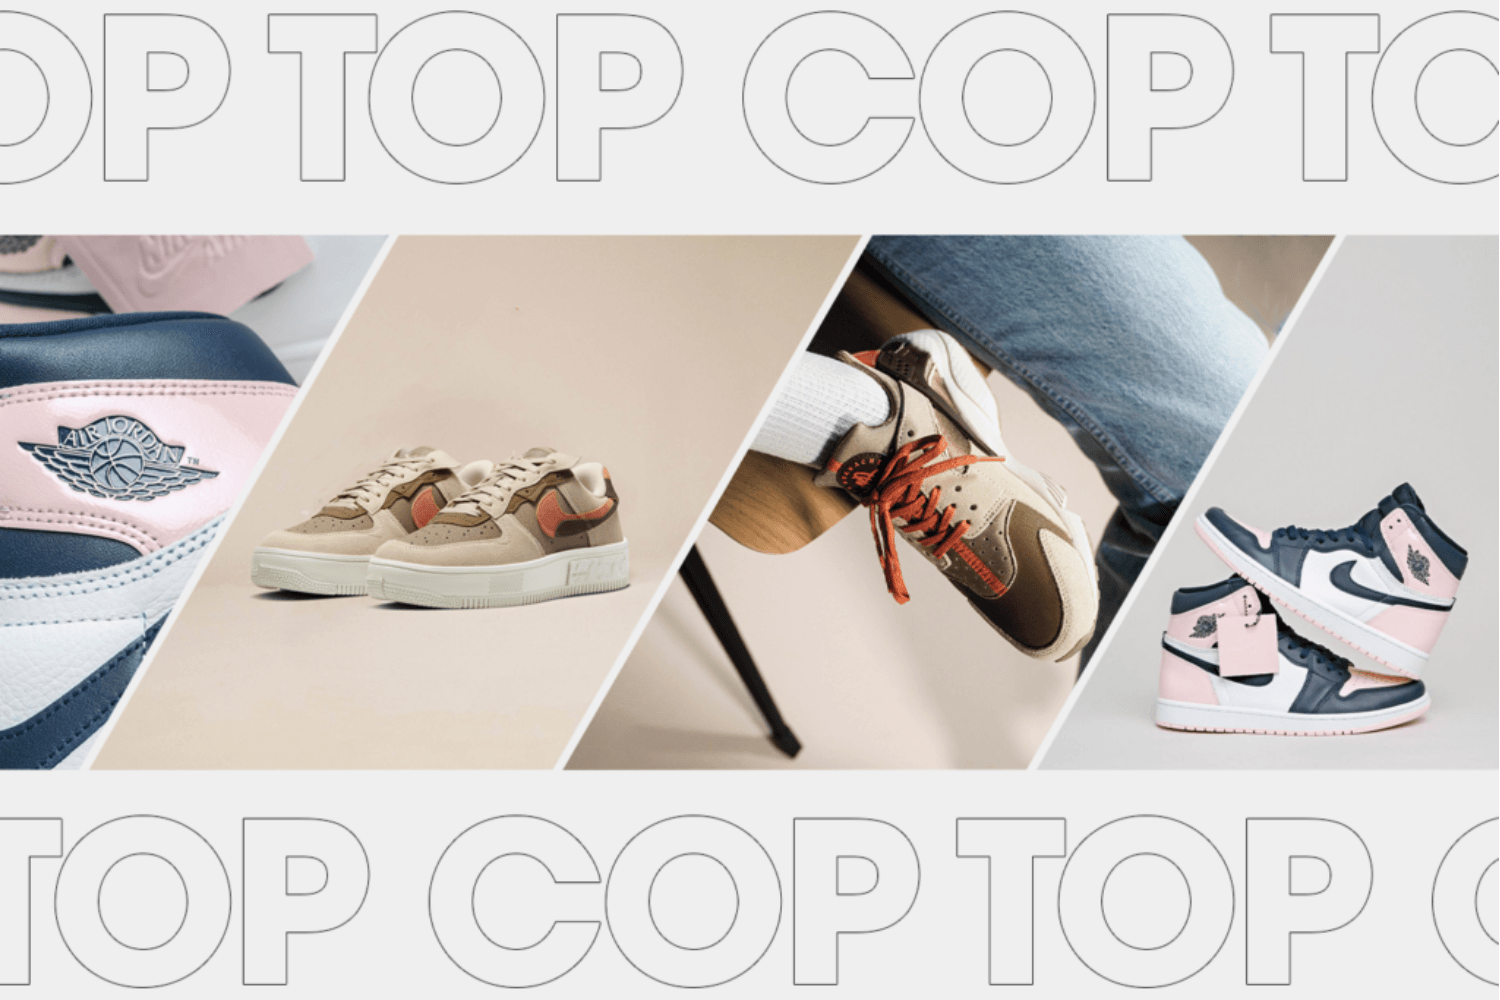 The community has voted: Your Top 3 Cop Sneaker - Week 4